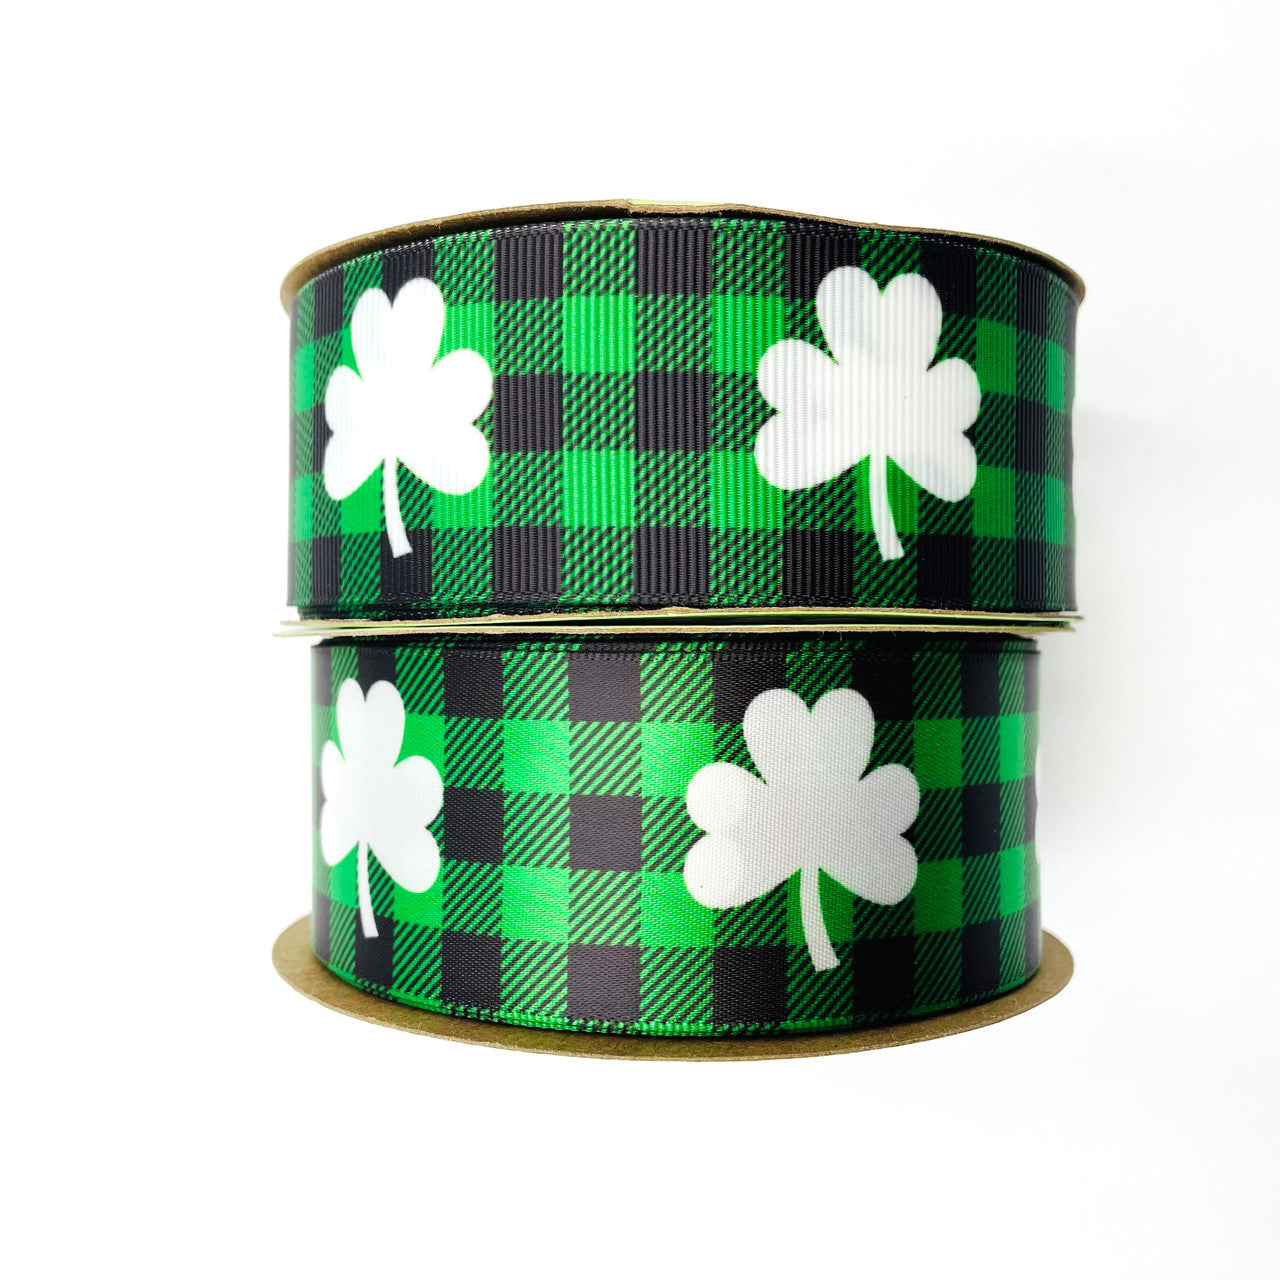 Our fun white shamrocks printed on a green and black buffalo plaid background come on satin and grosgrain!